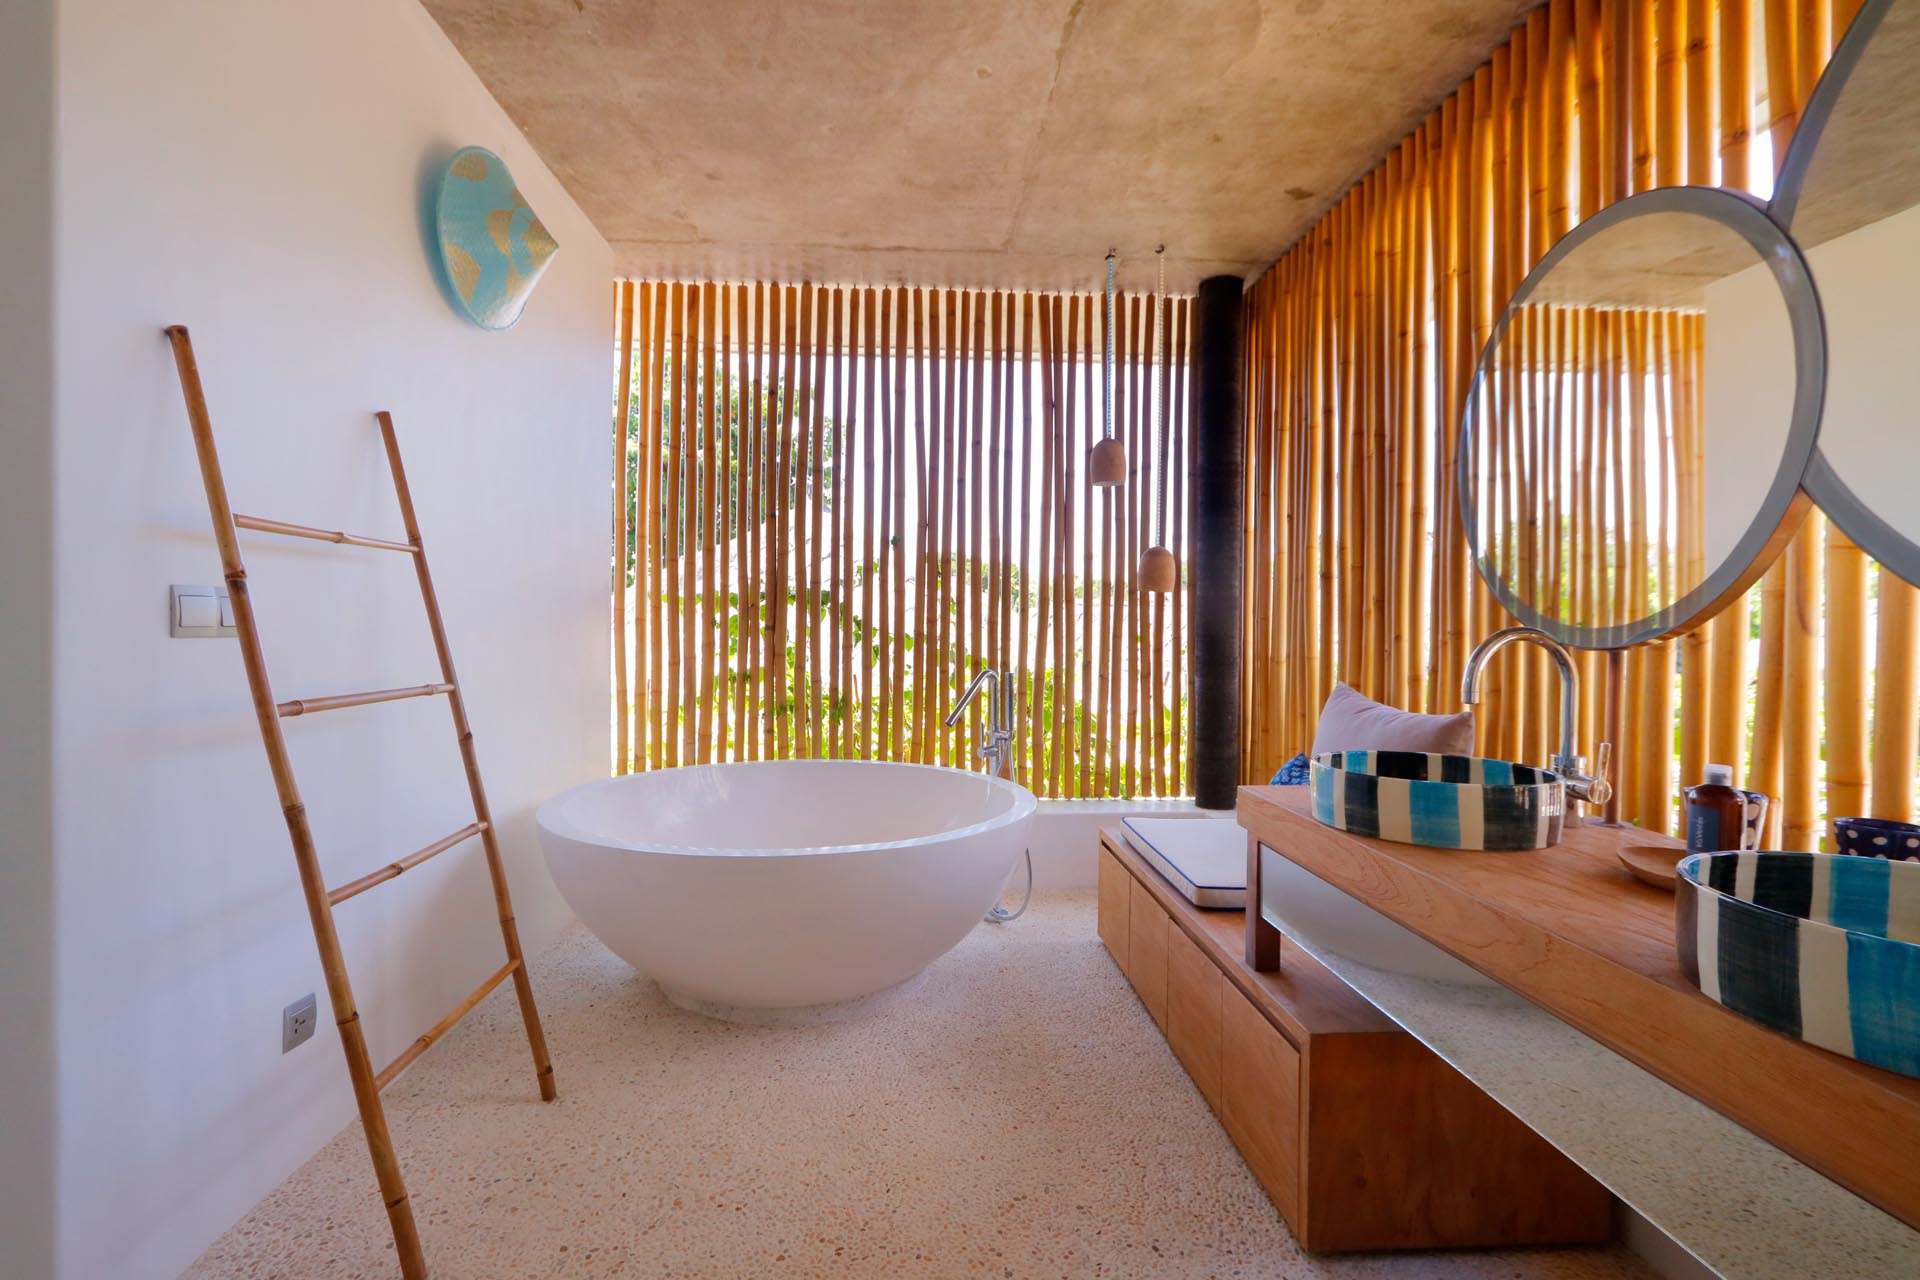 A modern bathroom with bamboo screens adds a natural design element that also provides privacy.